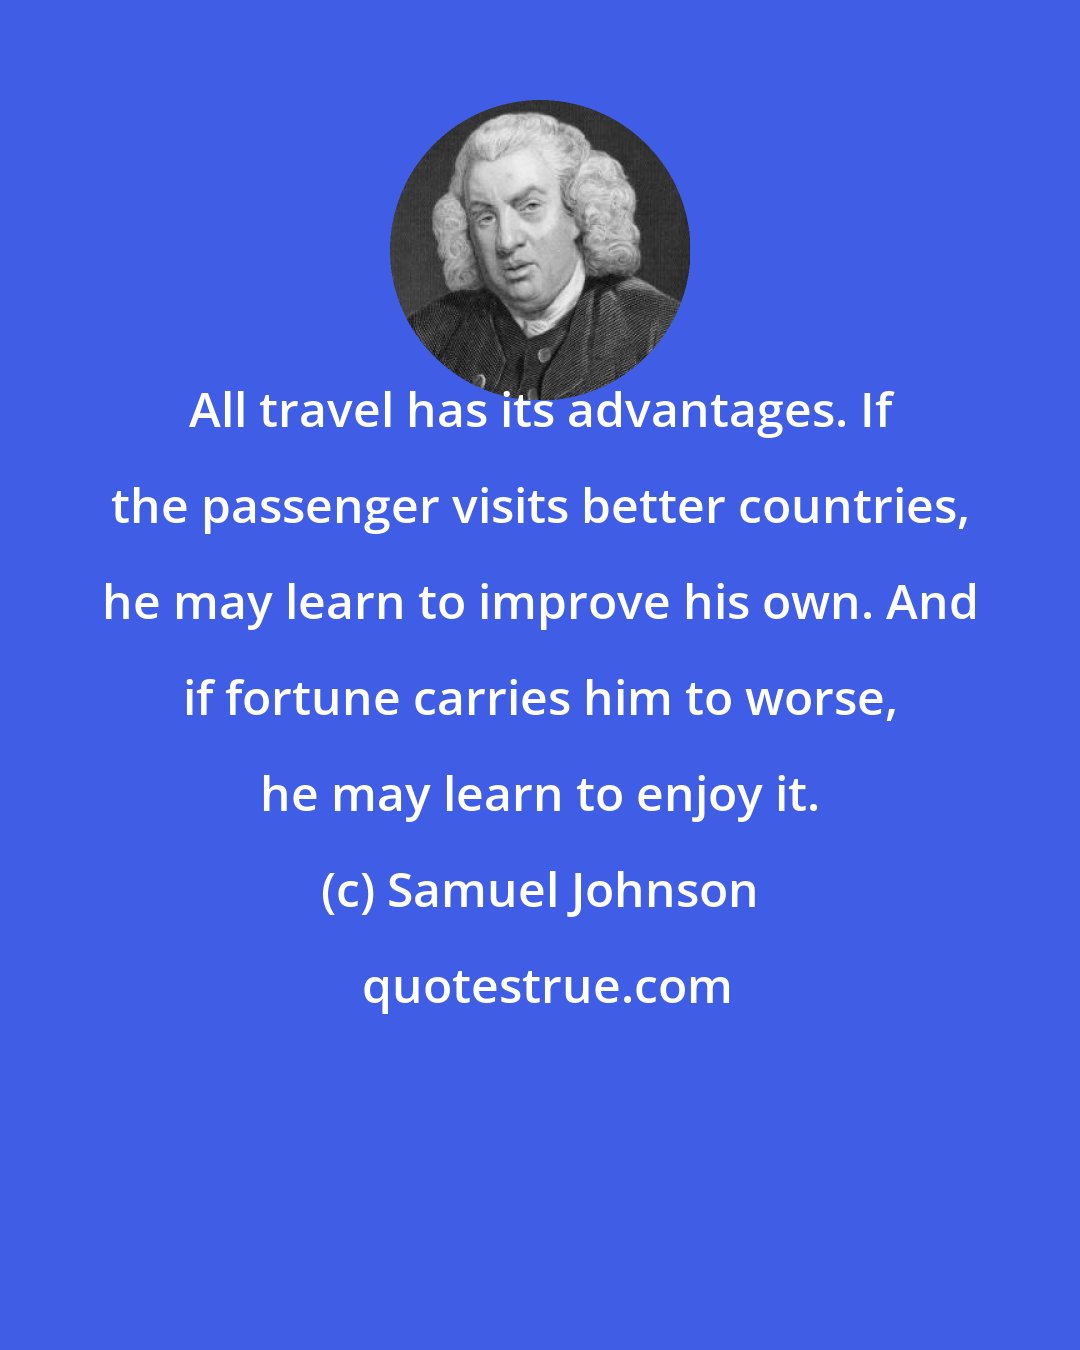 Samuel Johnson: All travel has its advantages. If the passenger visits better countries, he may learn to improve his own. And if fortune carries him to worse, he may learn to enjoy it.